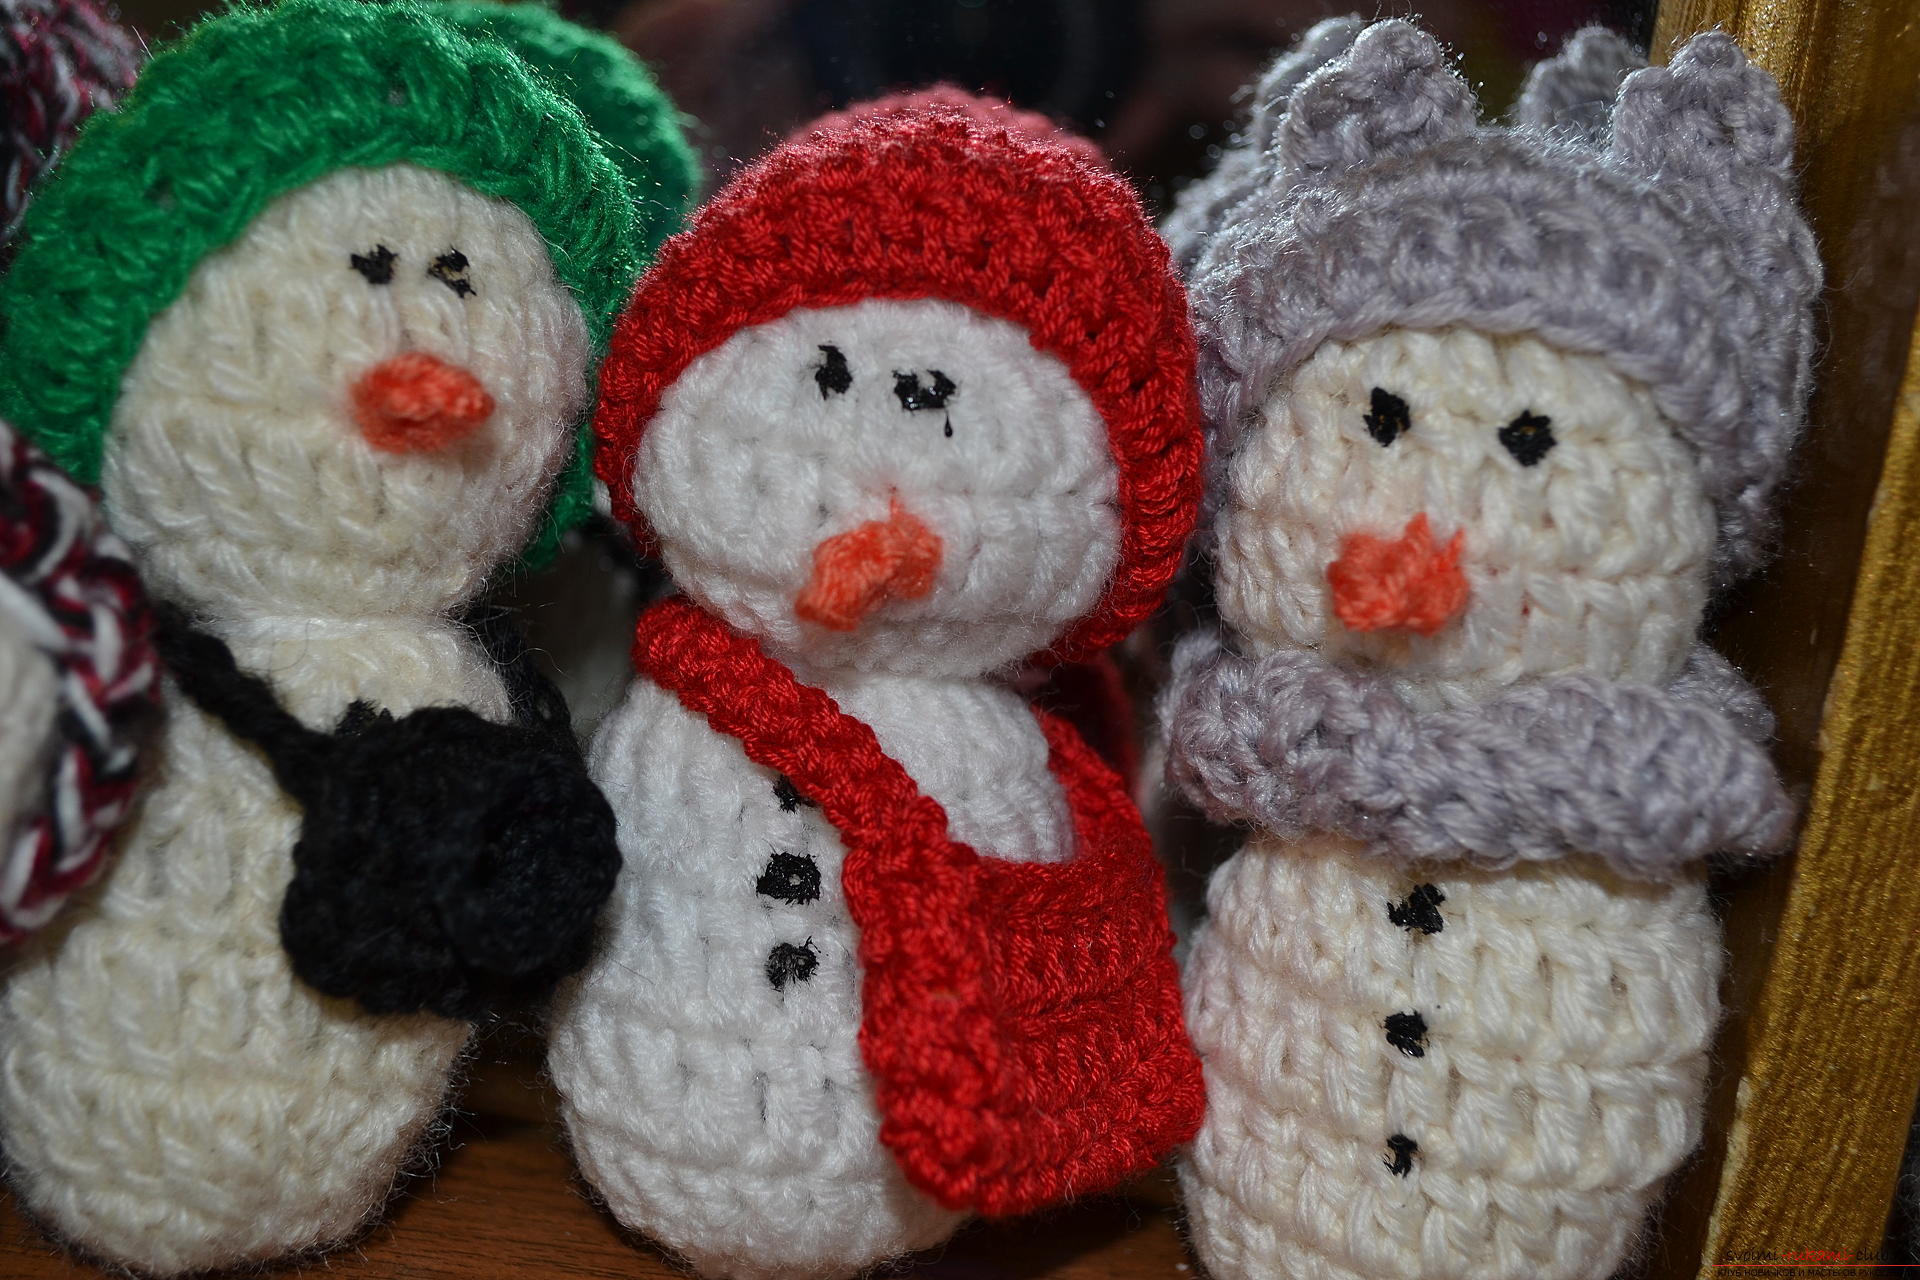 A master class with a photo and description will teach the crocheting of a snowman, which will be understandable for beginners. Photo number 17